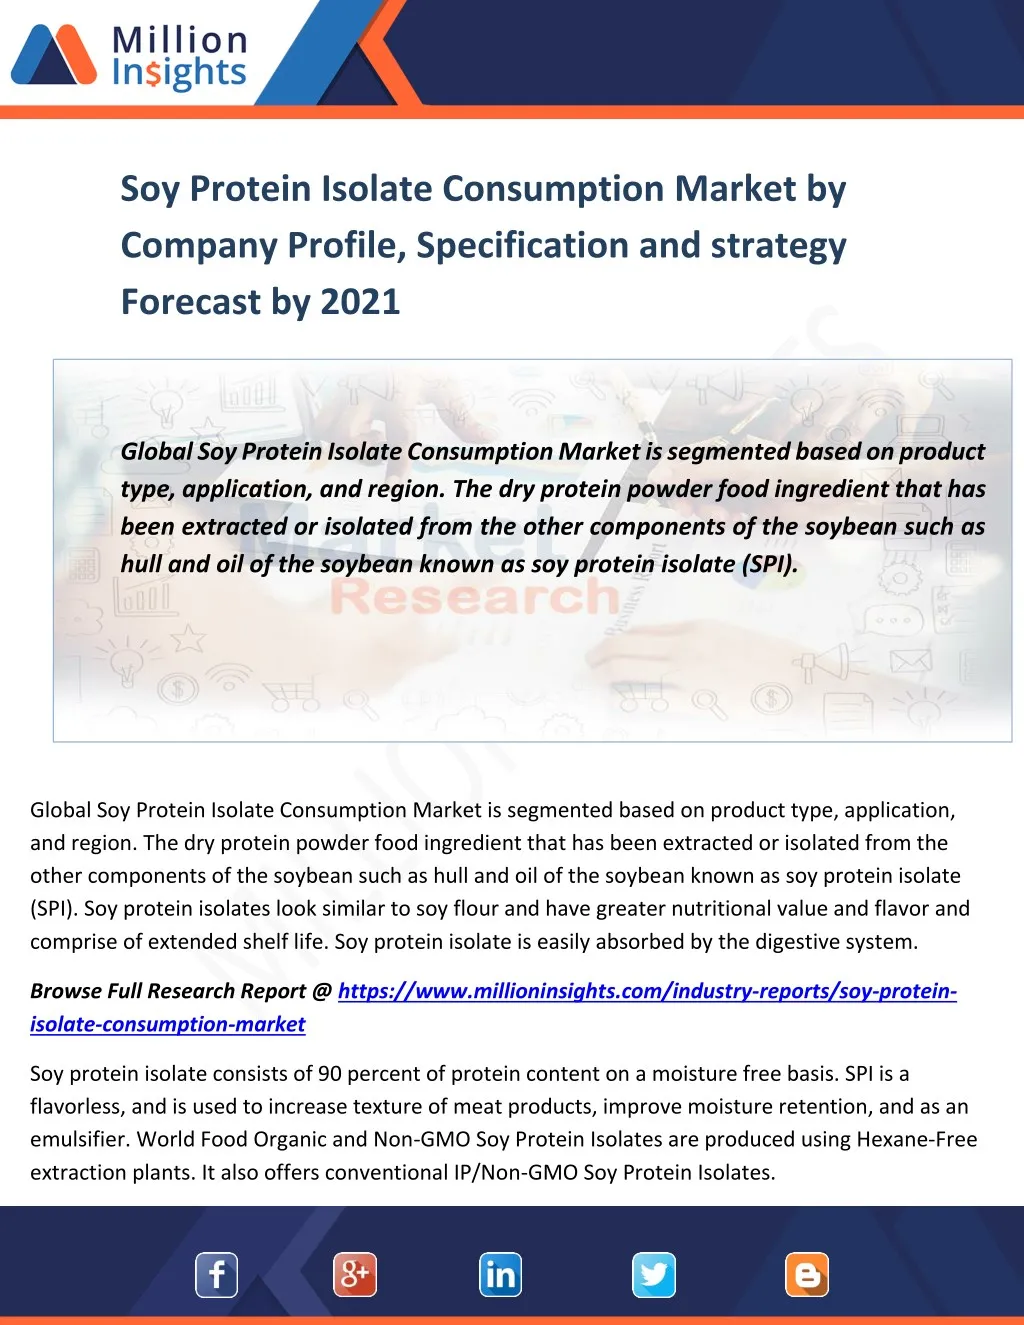 soy protein isolate consumption market by company